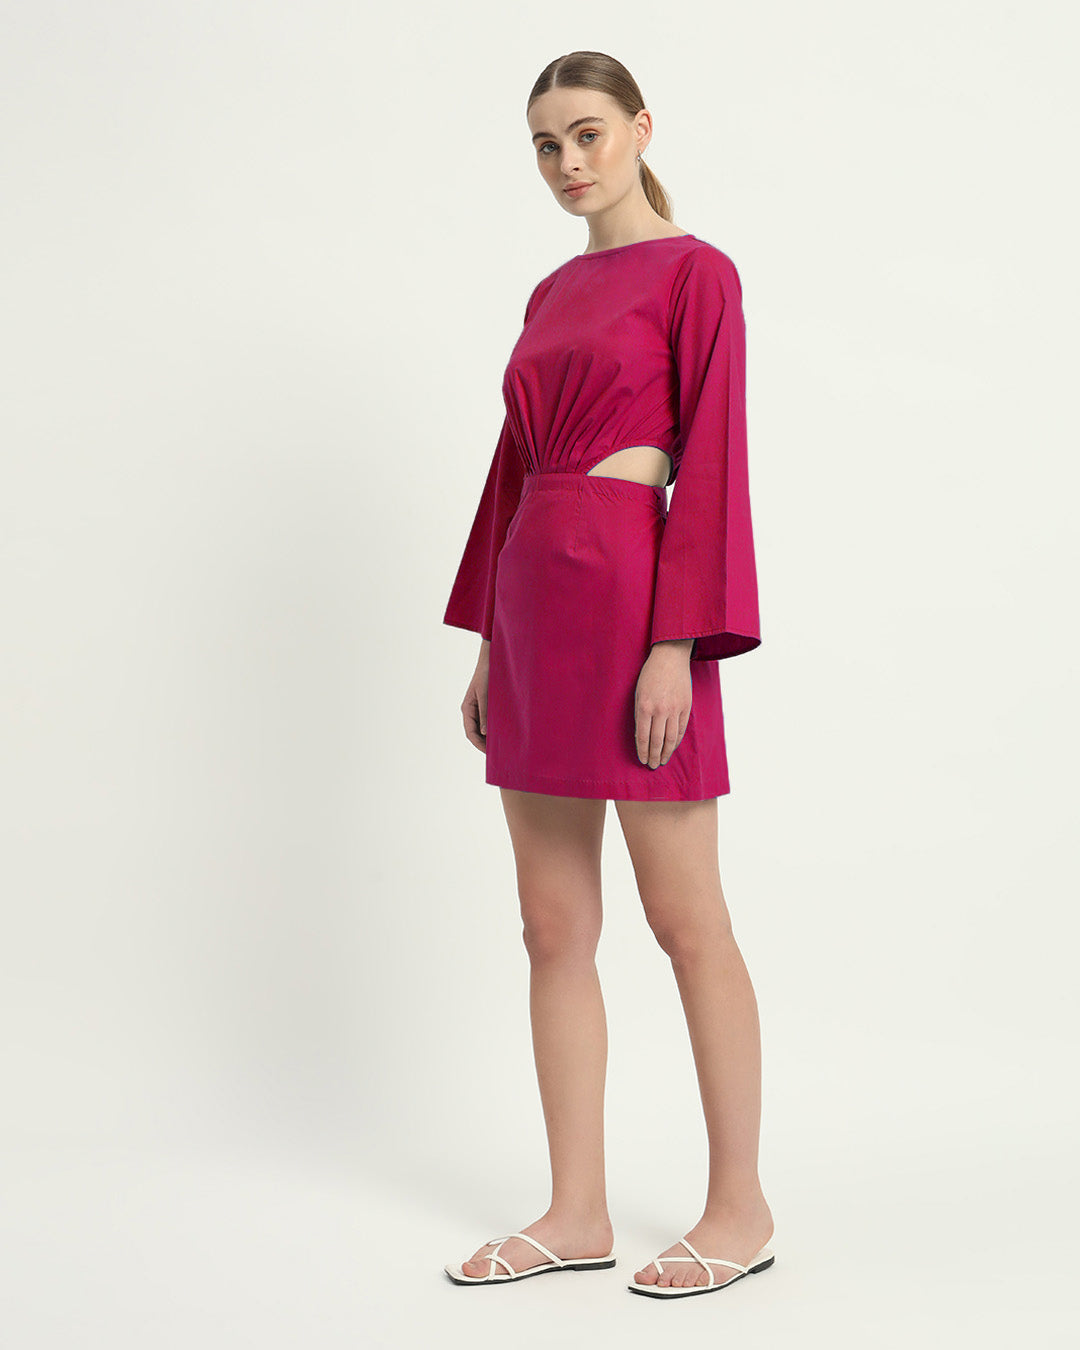 The Berry Eloy Cotton Dress